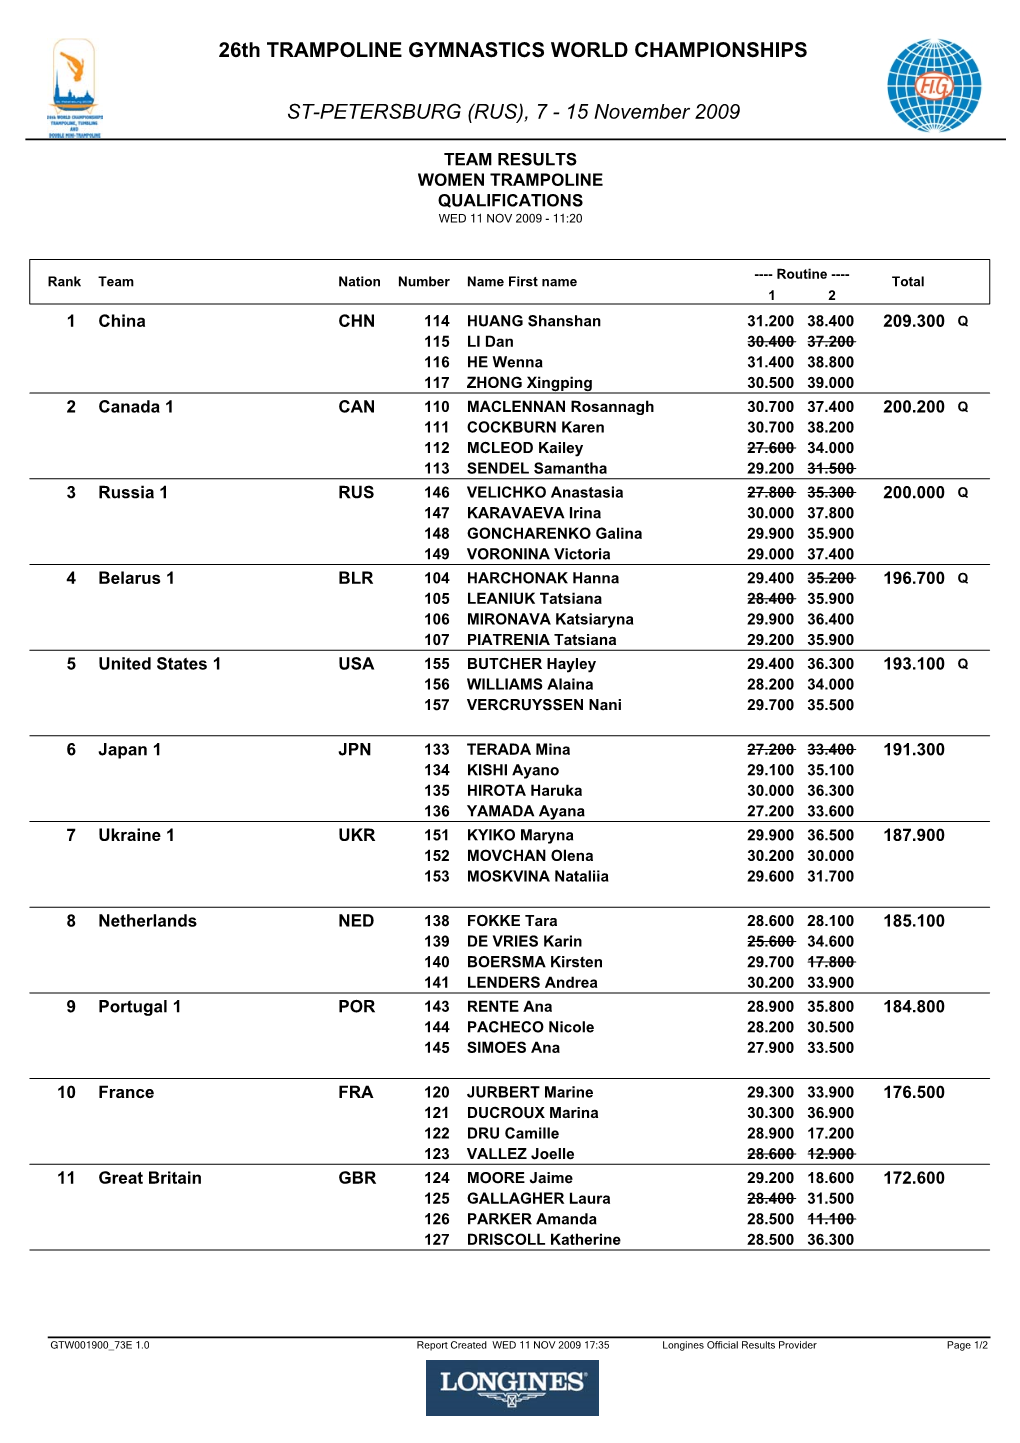 Results Trampoline Women's Qualifications